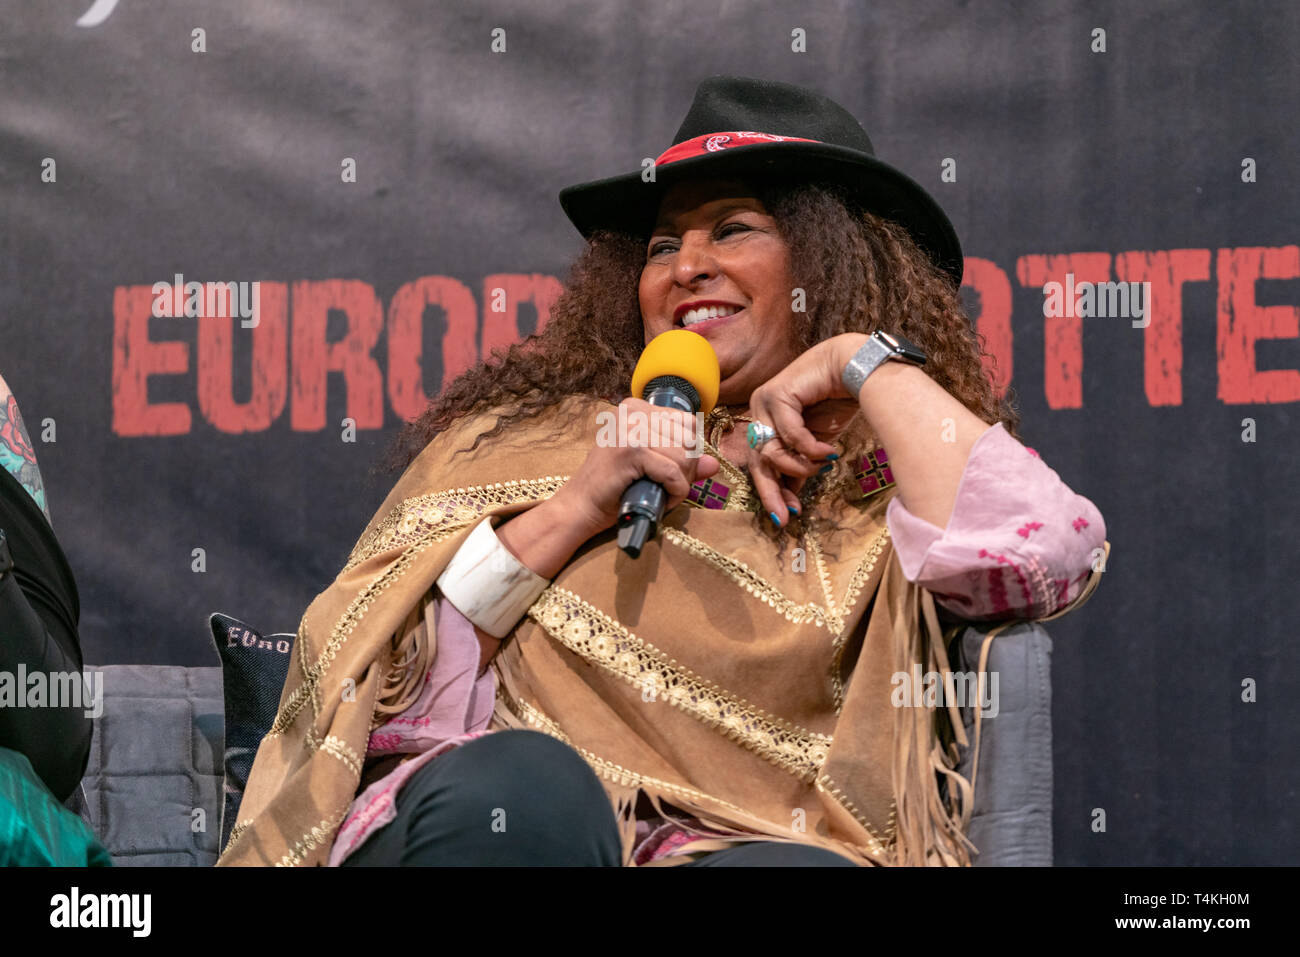 DORTMUND, GERMANY - April 14th 2018: Pam Grier (*1949, actress from the United States) at Weekend of Hell Spring Edition 2019, a two day (April 13-14 2019) horror-themed fan convention. Stock Photo